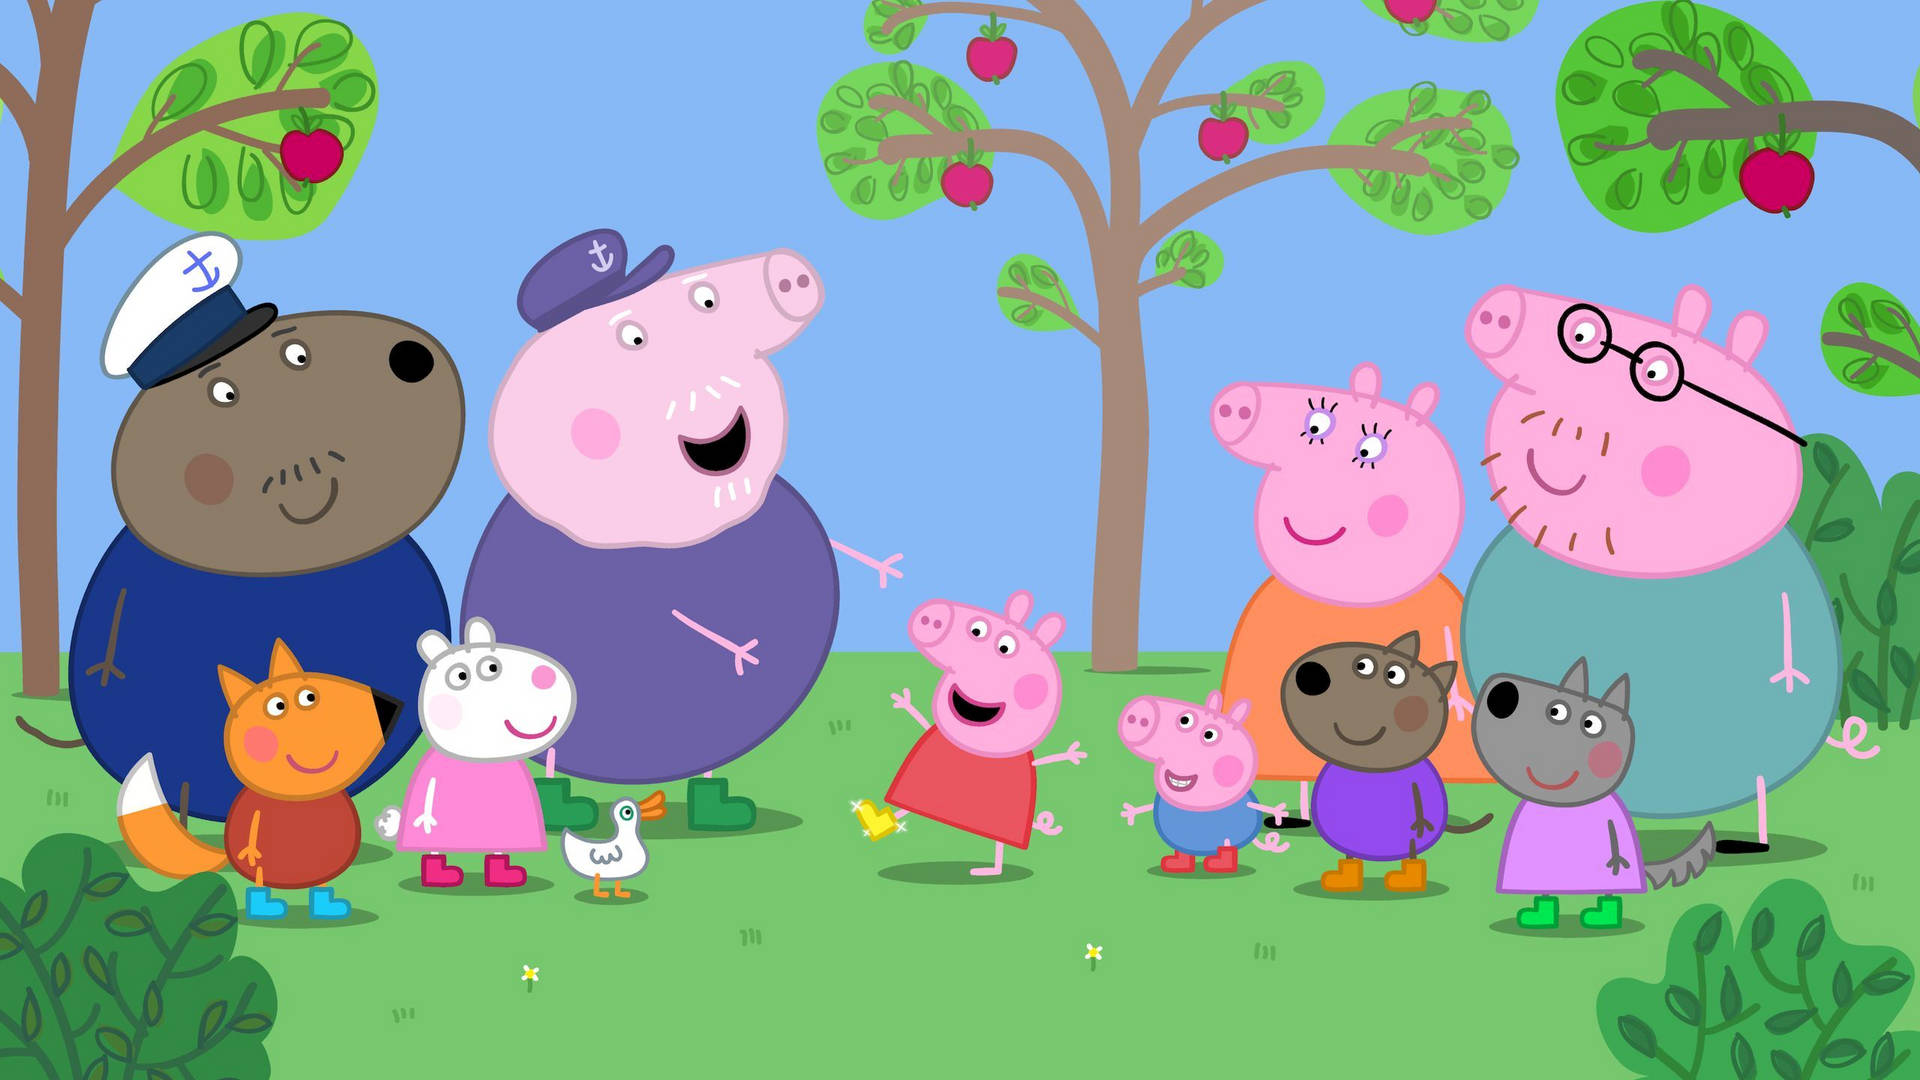 Peppa Pig family and friends in the forest wallpaper.